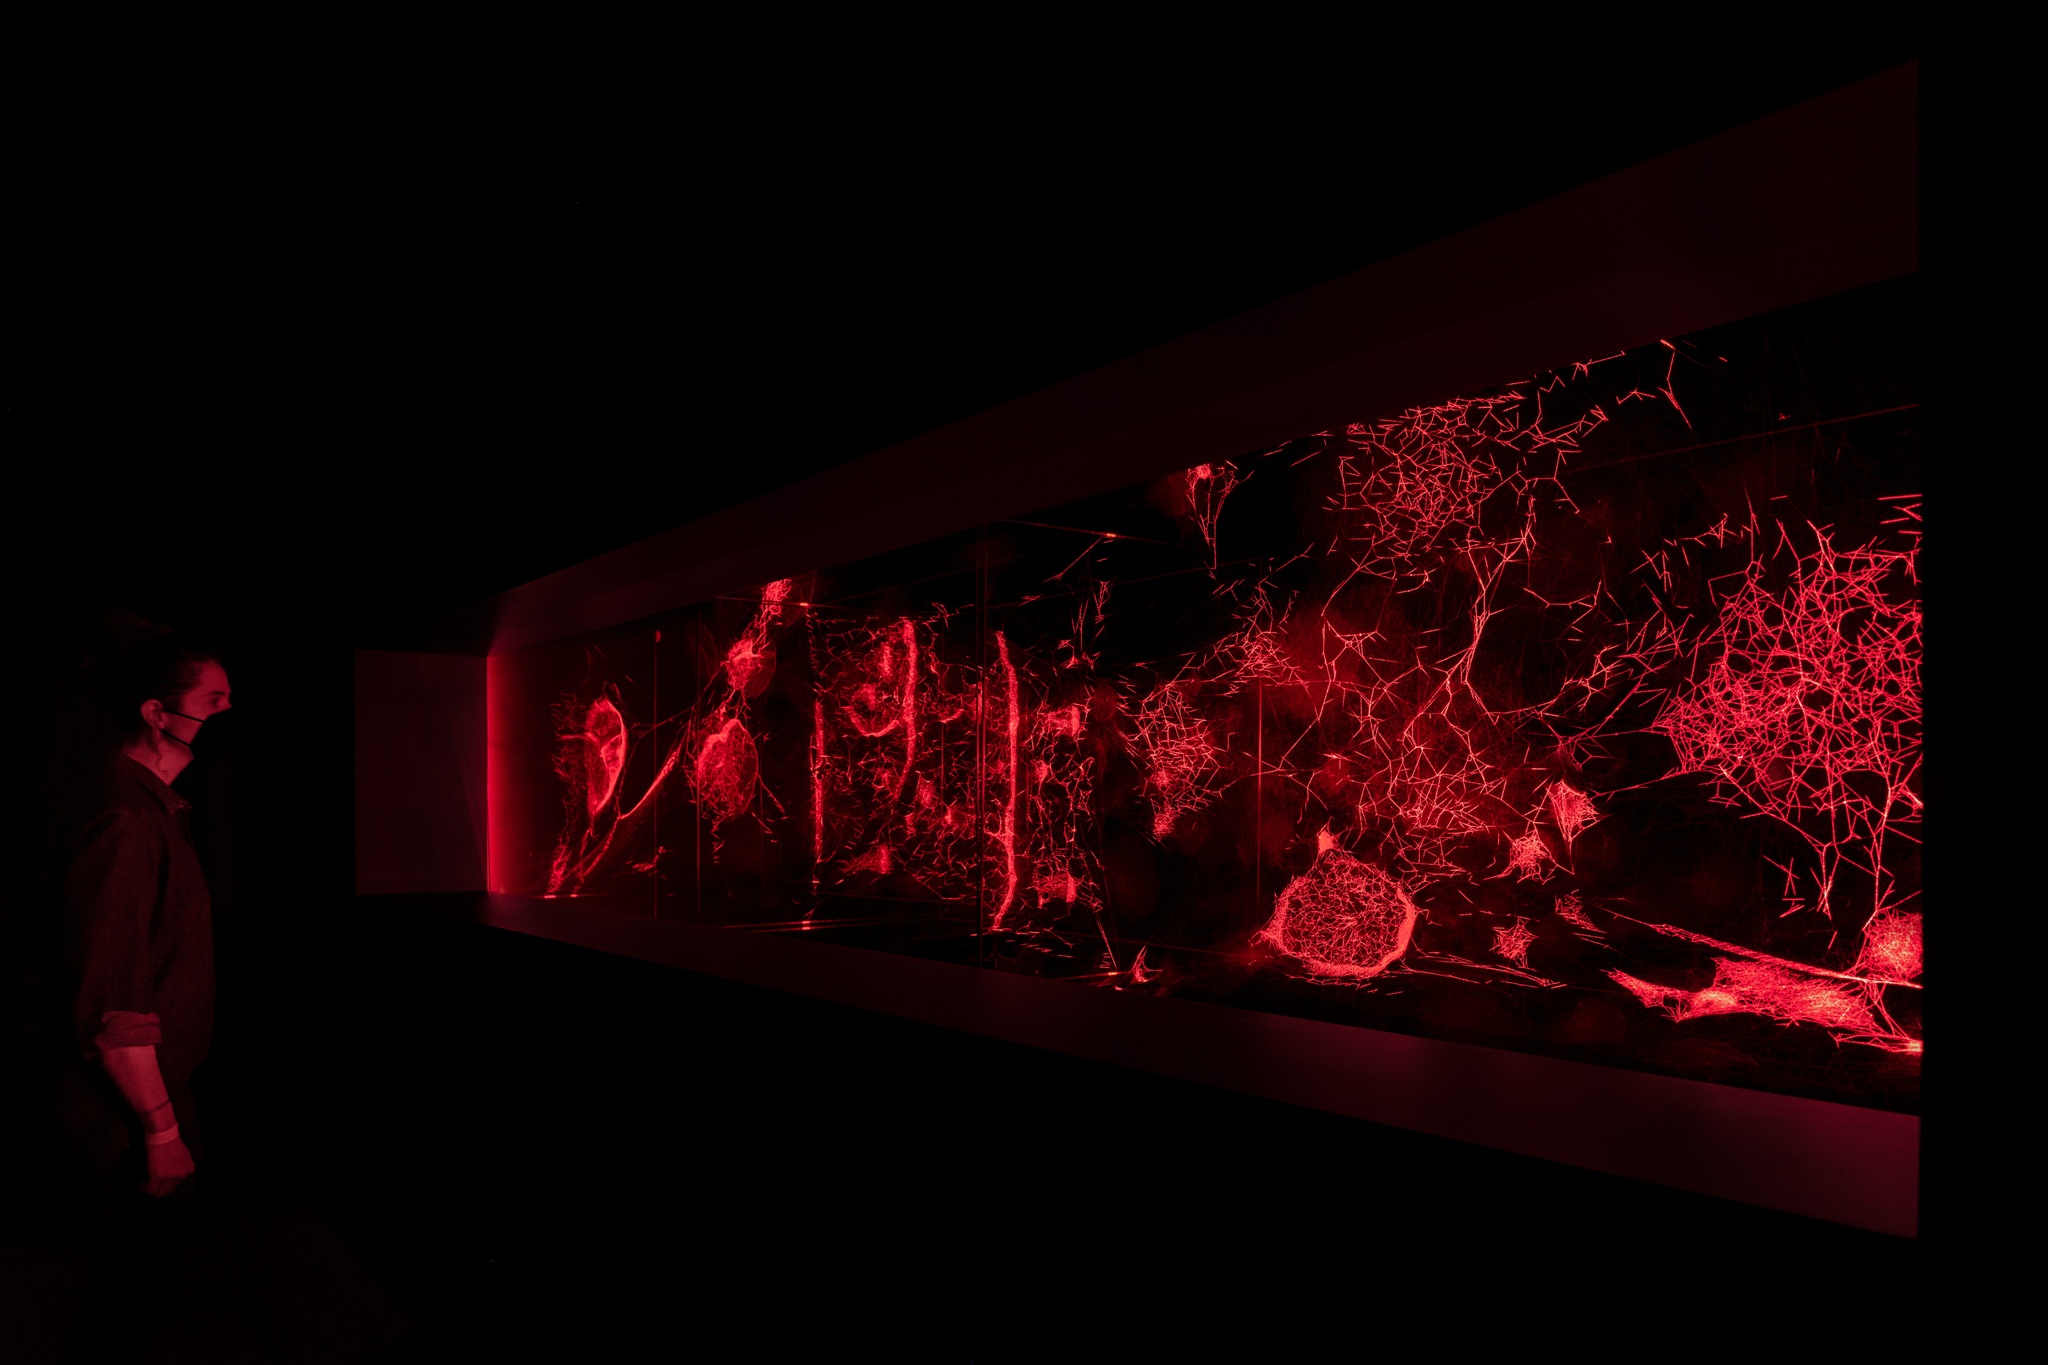 A person stands in a darkened gallery to the left of a long horizontal window revealing a series of spider webs dramatically lit by red light